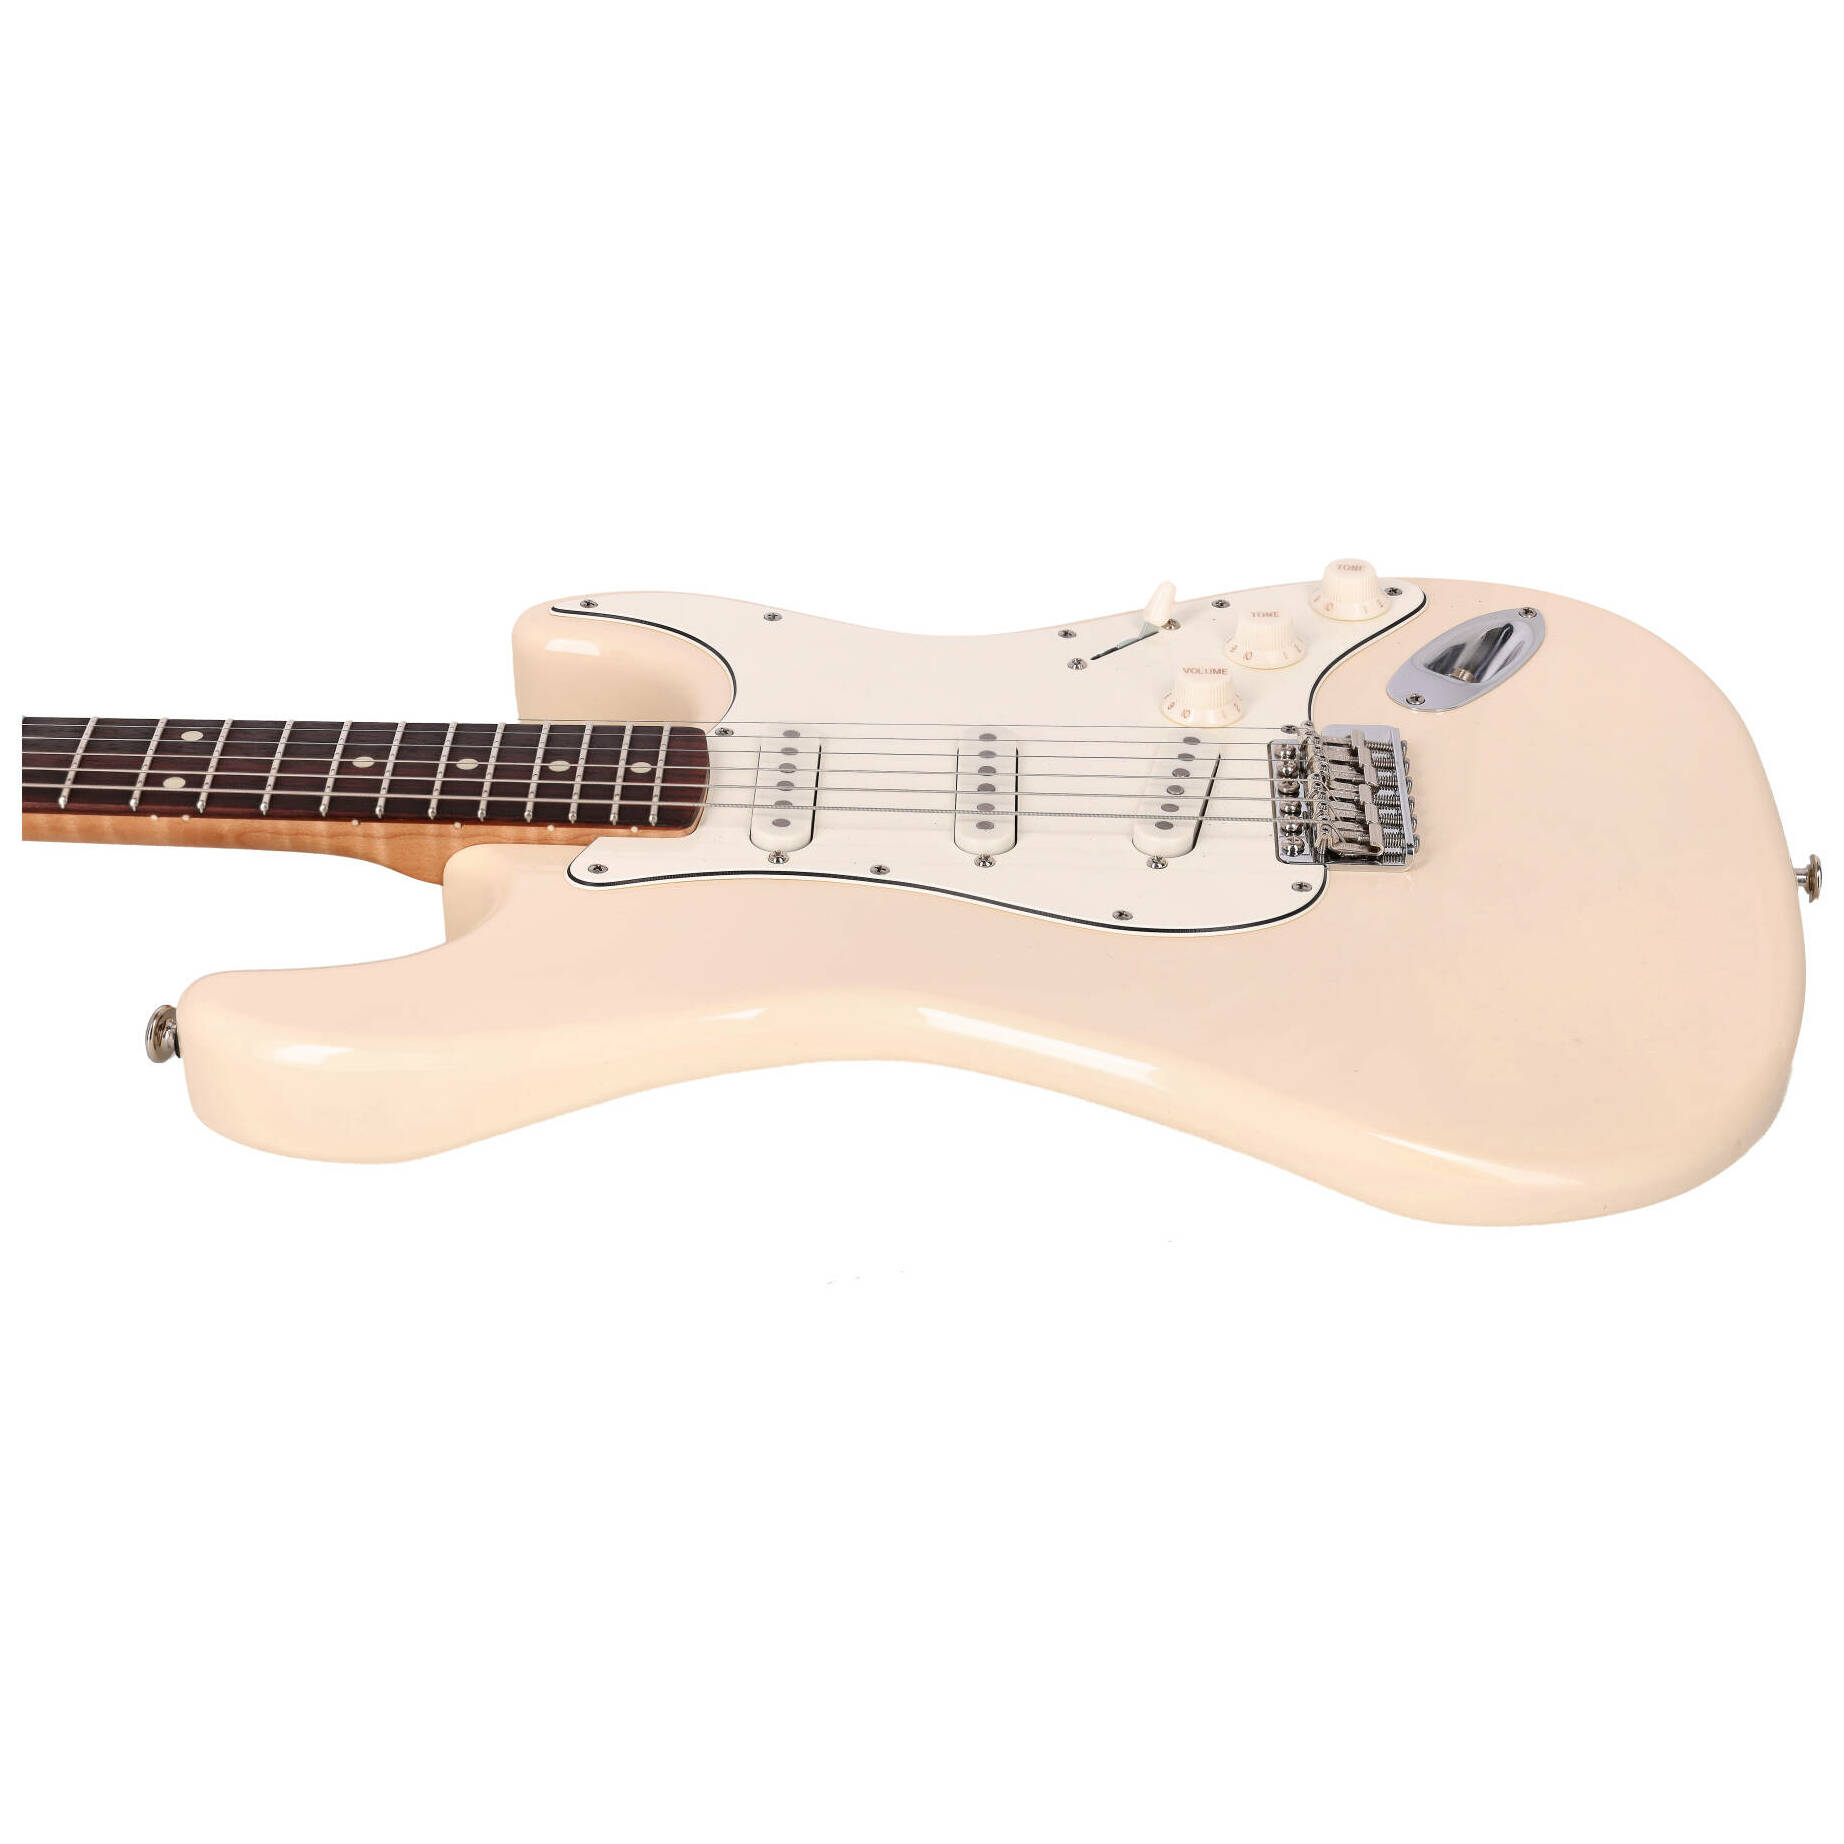 Haar Traditional S Gloss Vintage White #2 8